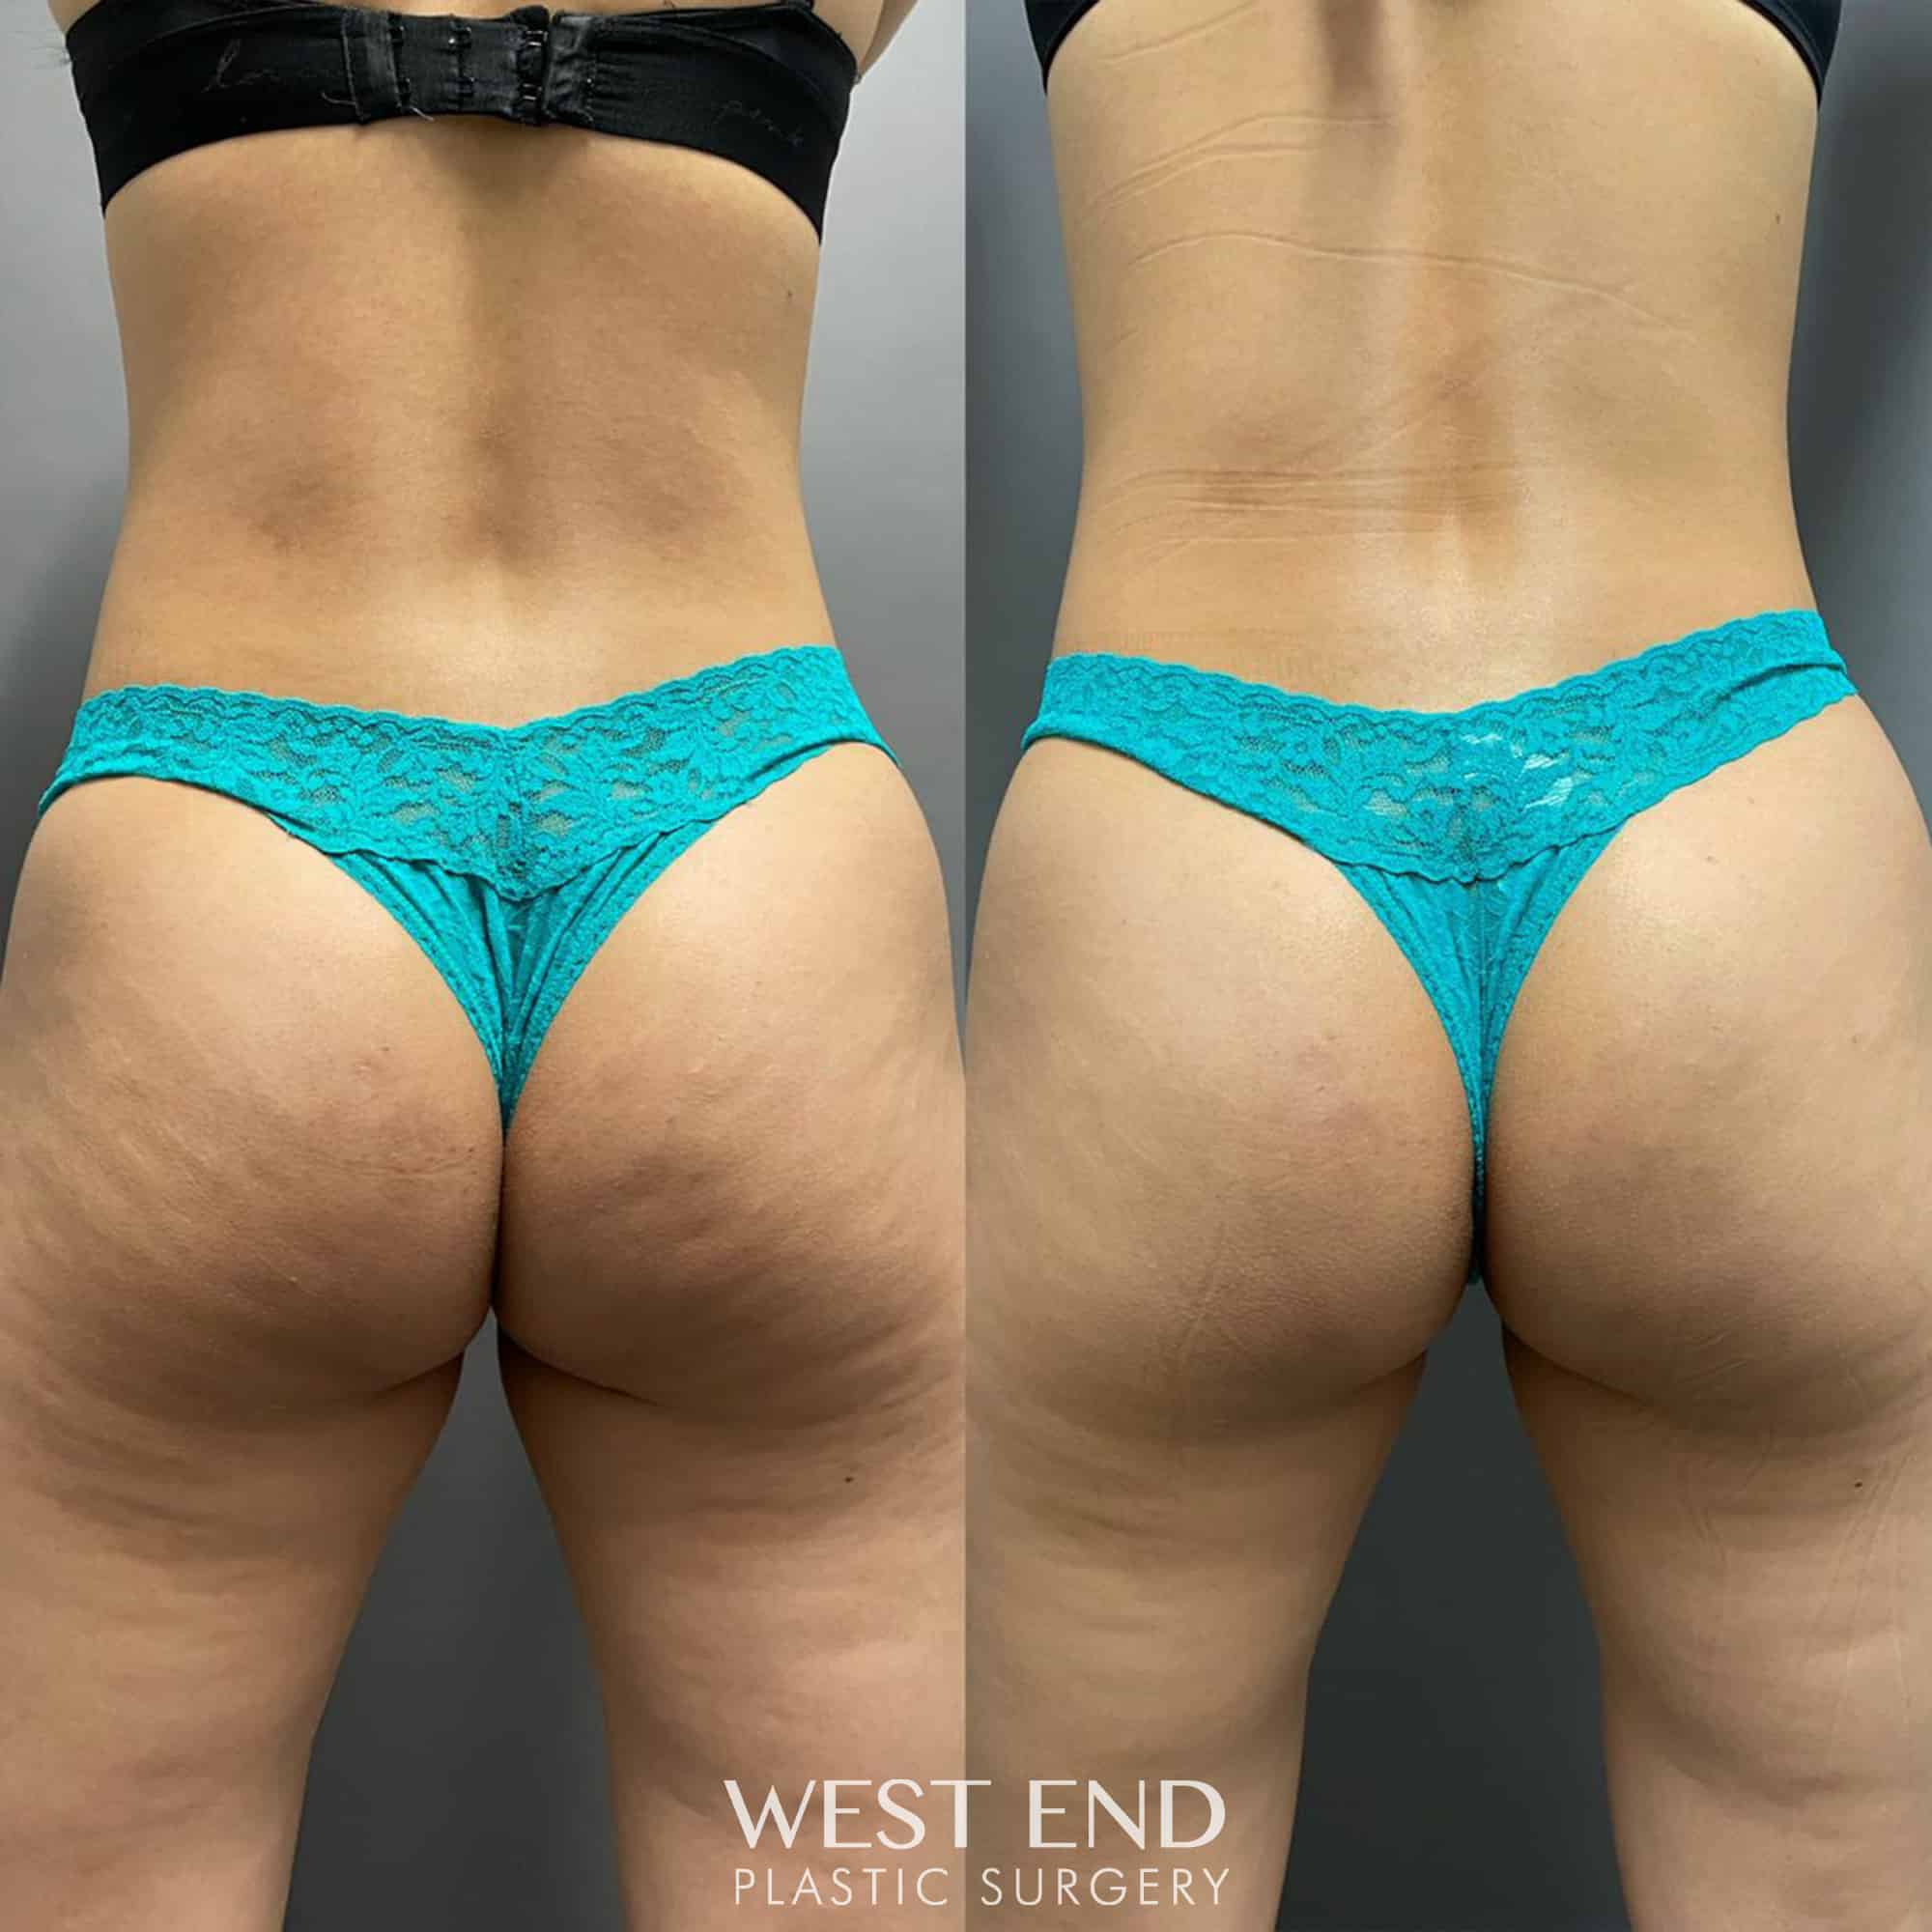 QWO (Injectable for Cellulite in Buttock)